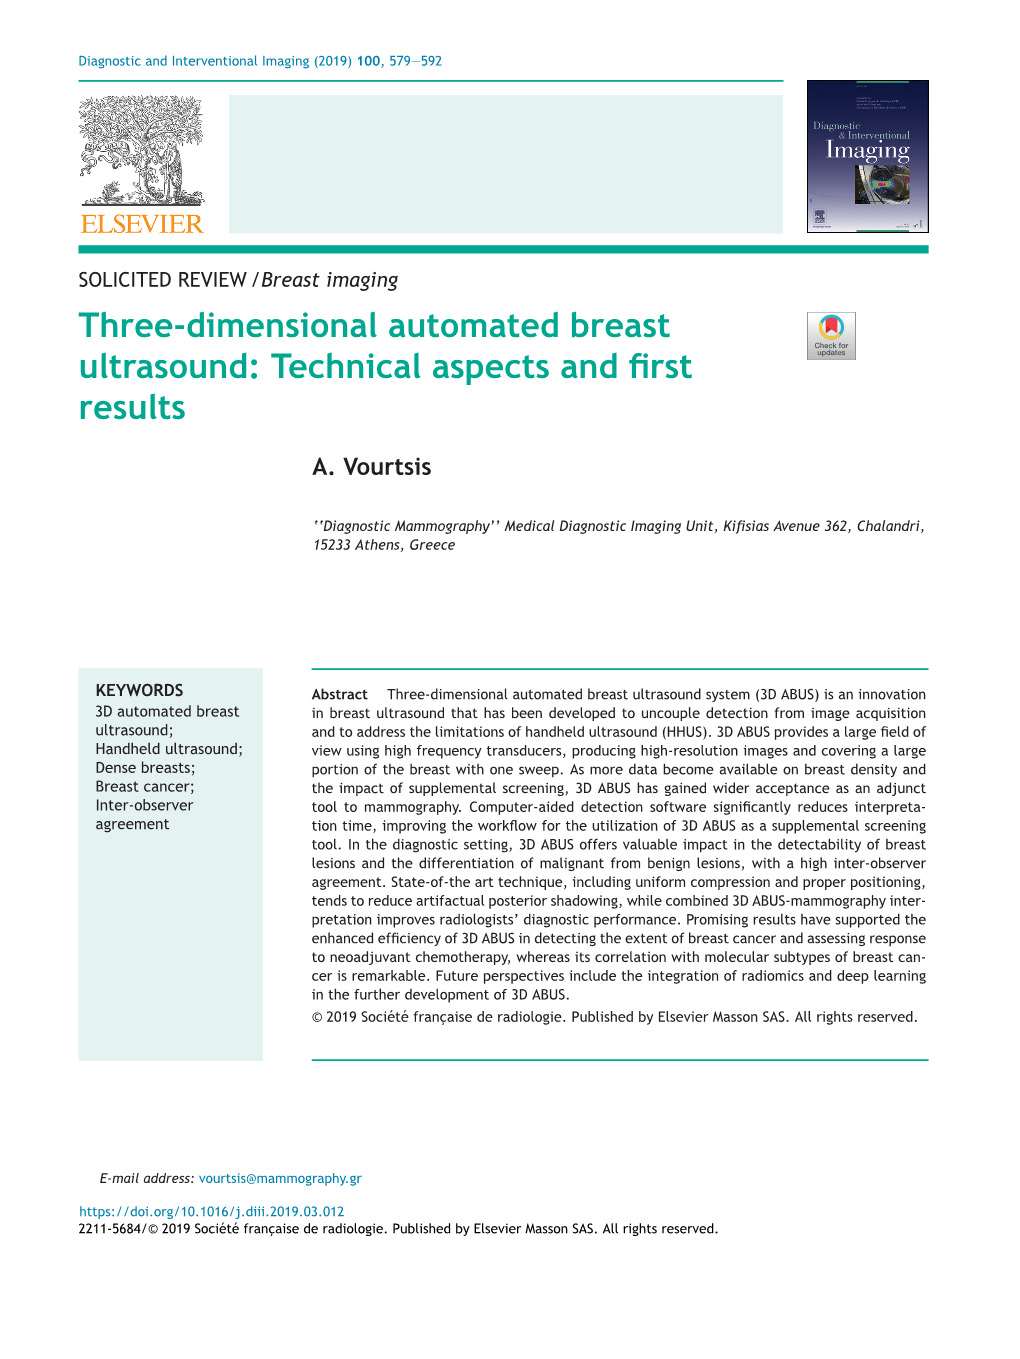 Three-Dimensional Automated Breast Ultrasound: Technical Aspects And